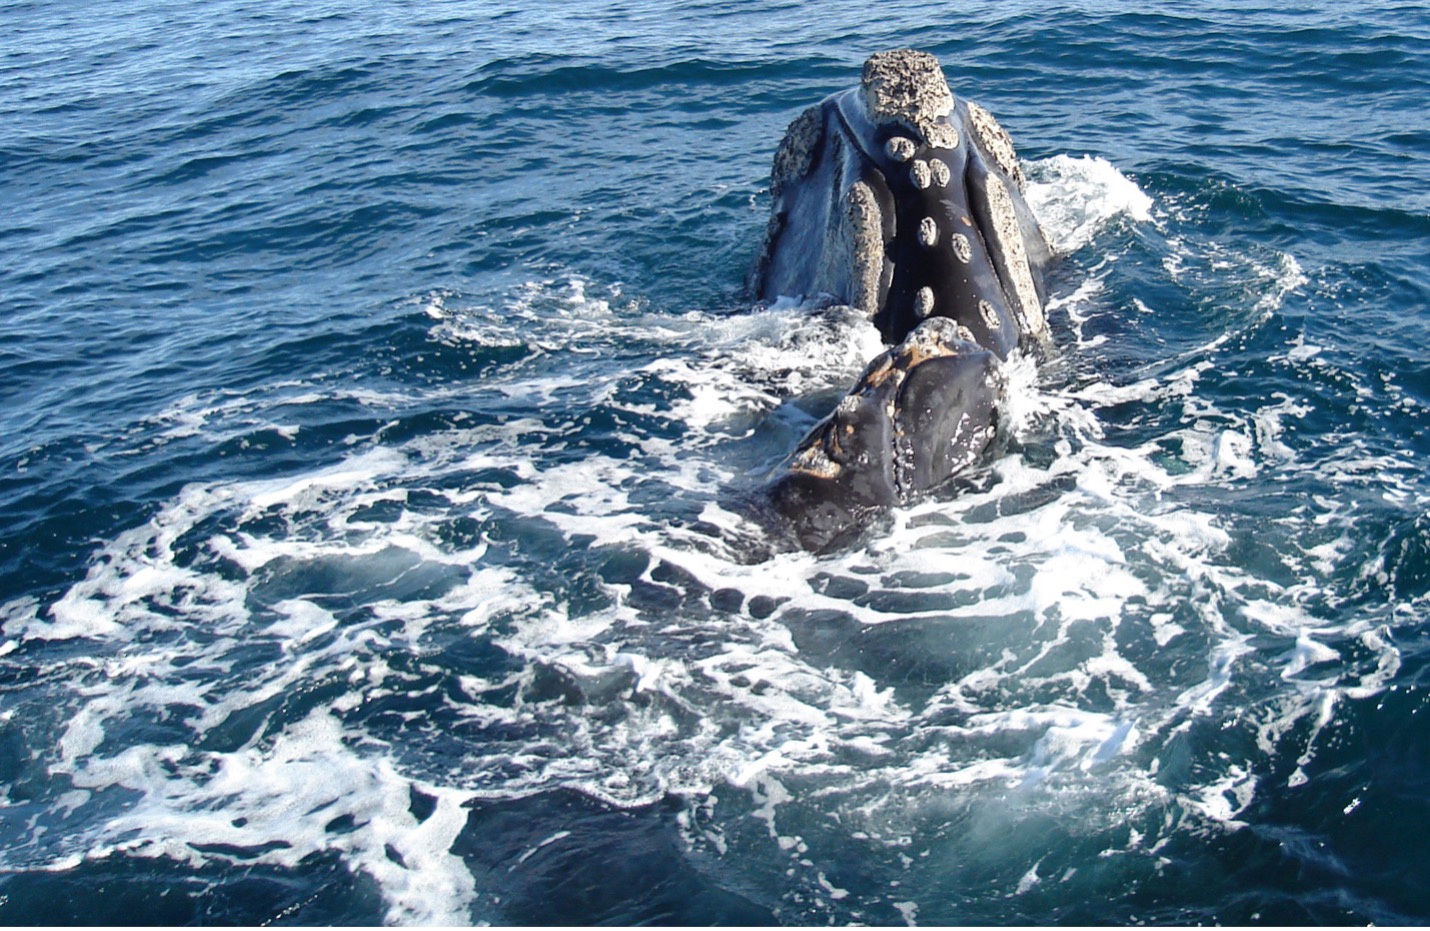 The right whales of Chile and Peru are remnants of a unique and highly depleted population that urgently needs the implementation of effective protection measures to avoid extinction. Photo: C. Poduje/Cetacea Conservation Center